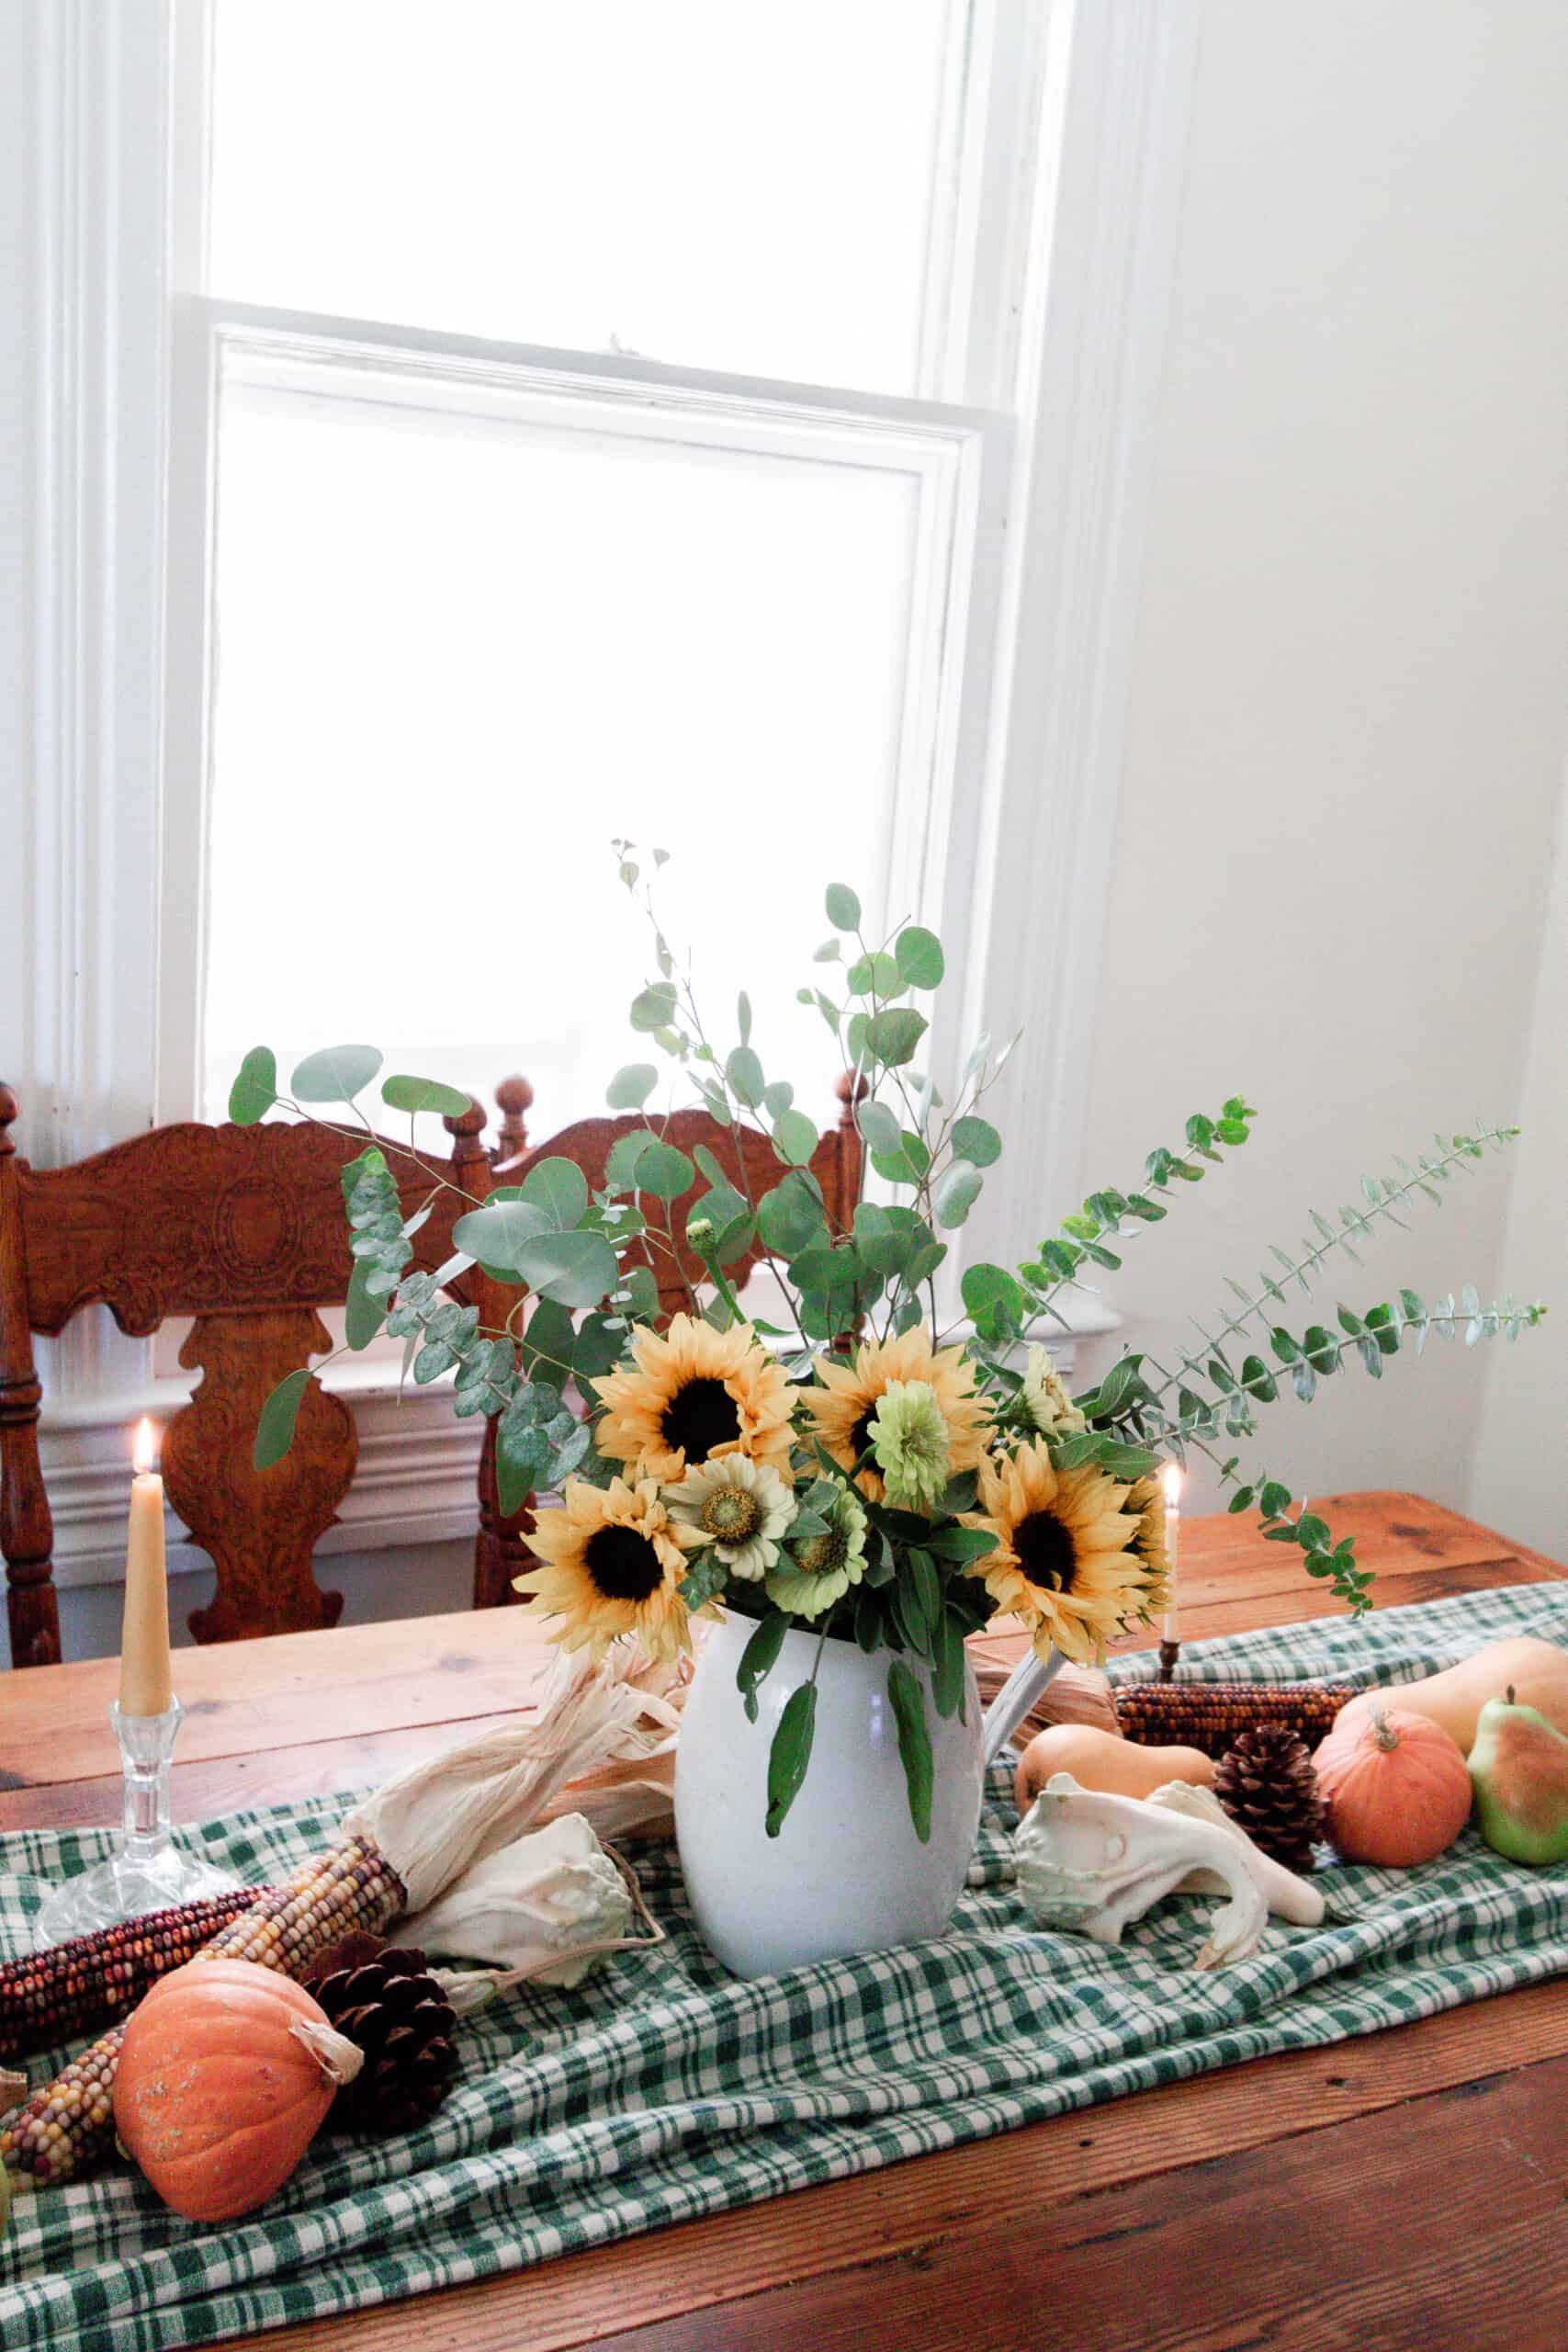 13 Fall Kitchen Decor Ideas to Bring Autumn Colors Inside